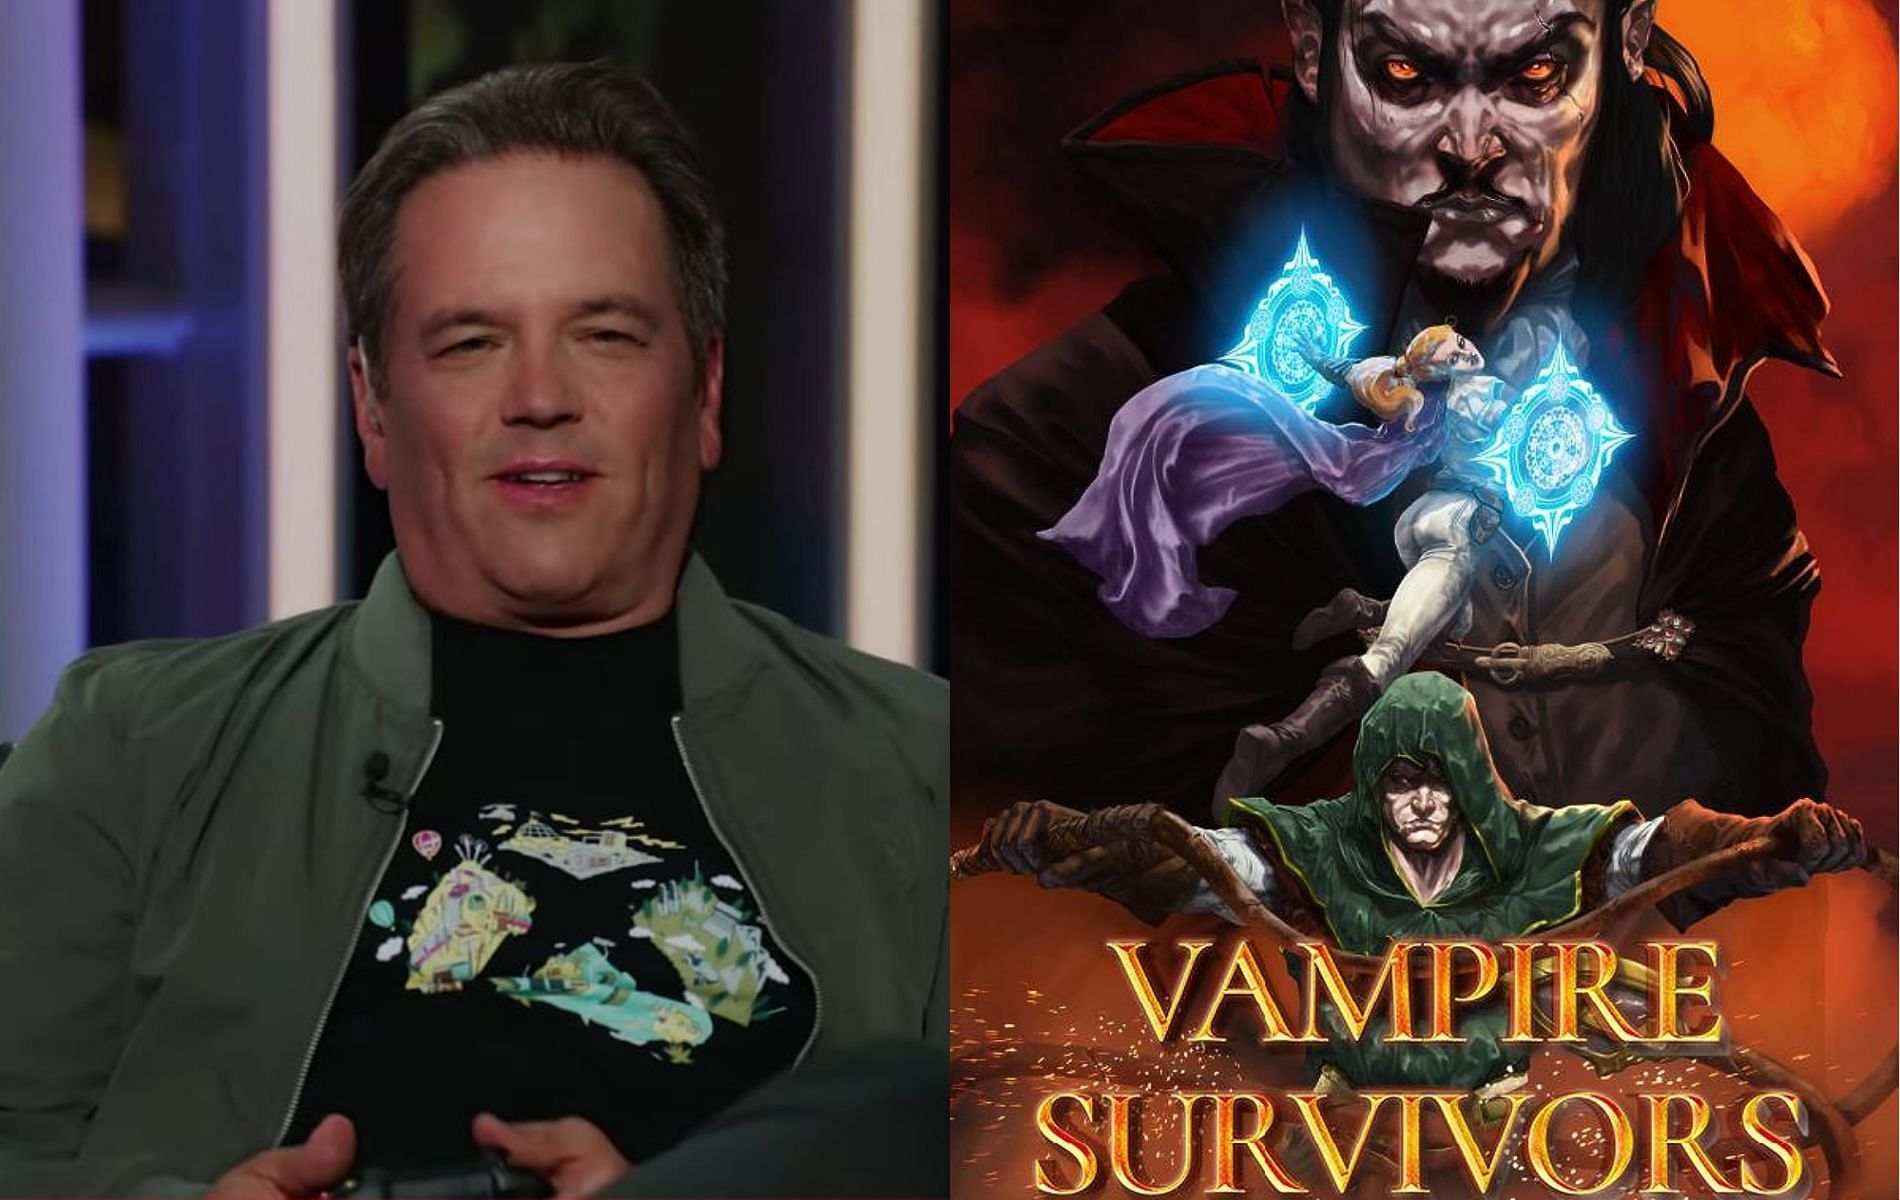 Cover art featuring Xbox head Phil Spencer and feature art for Vampire Survivors